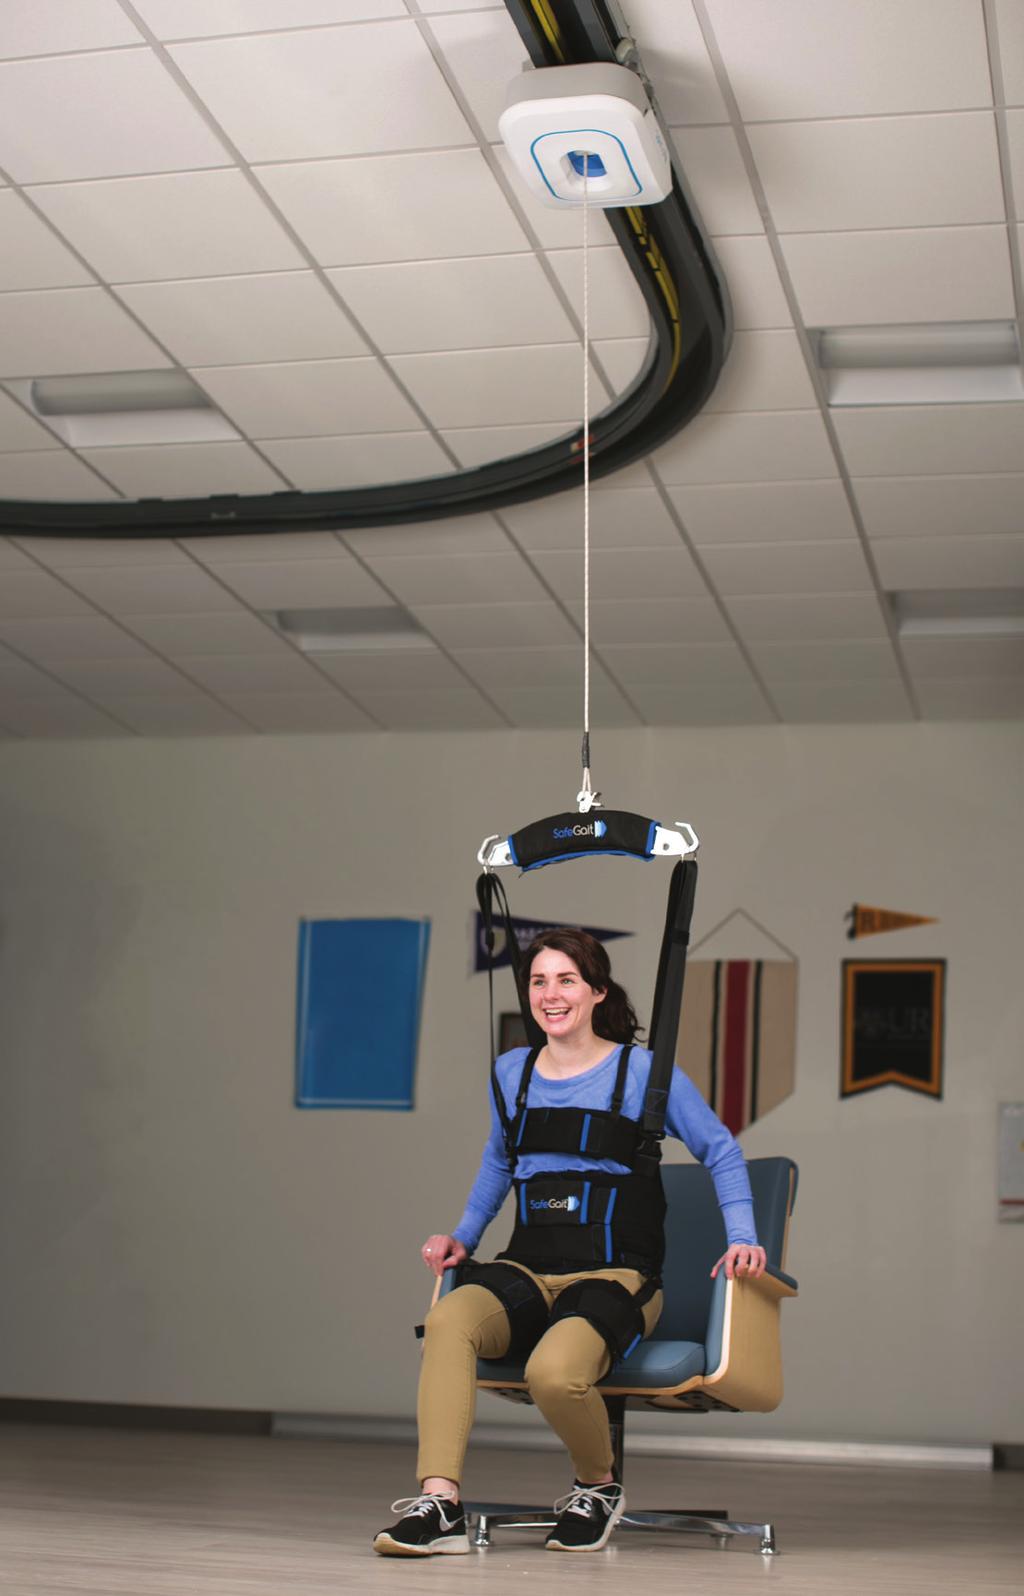 Advance the Continuum of Care With SafeGait ACTIVE, you can confidently challenge patients with more repetitions and intensity as they practice ADLs.